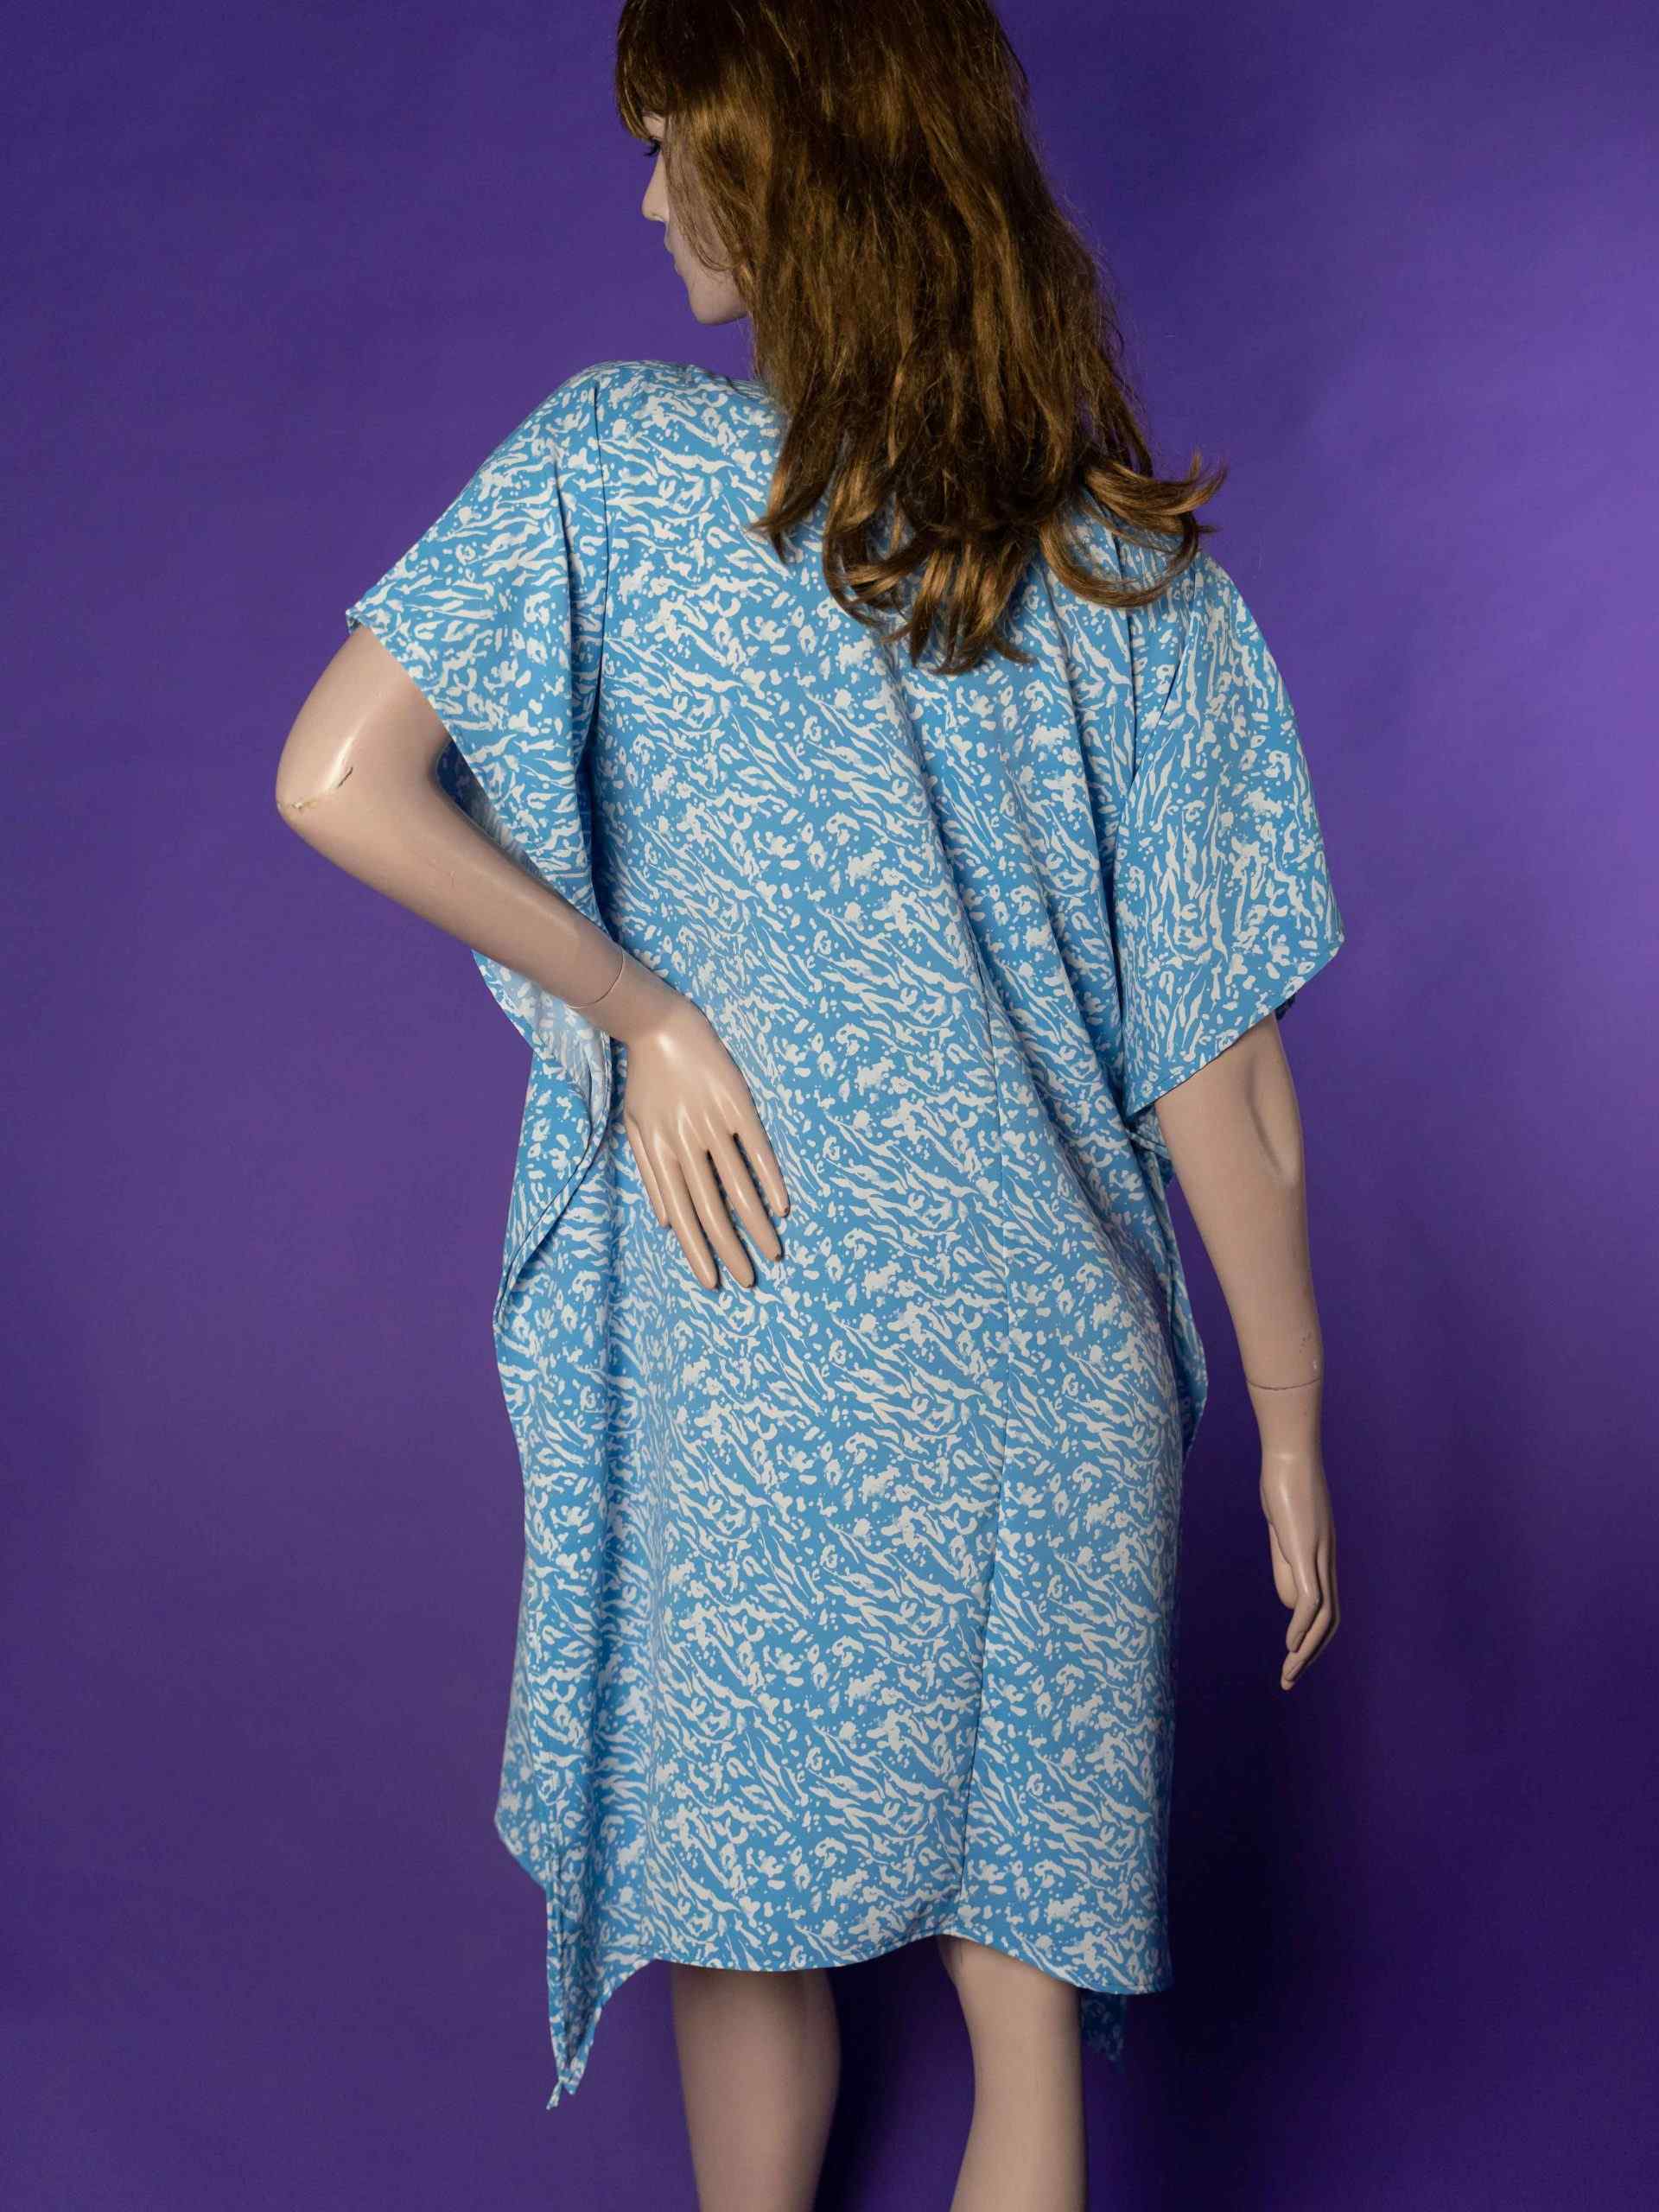 Hospital Gown Patterns  Lazy Girl Designs